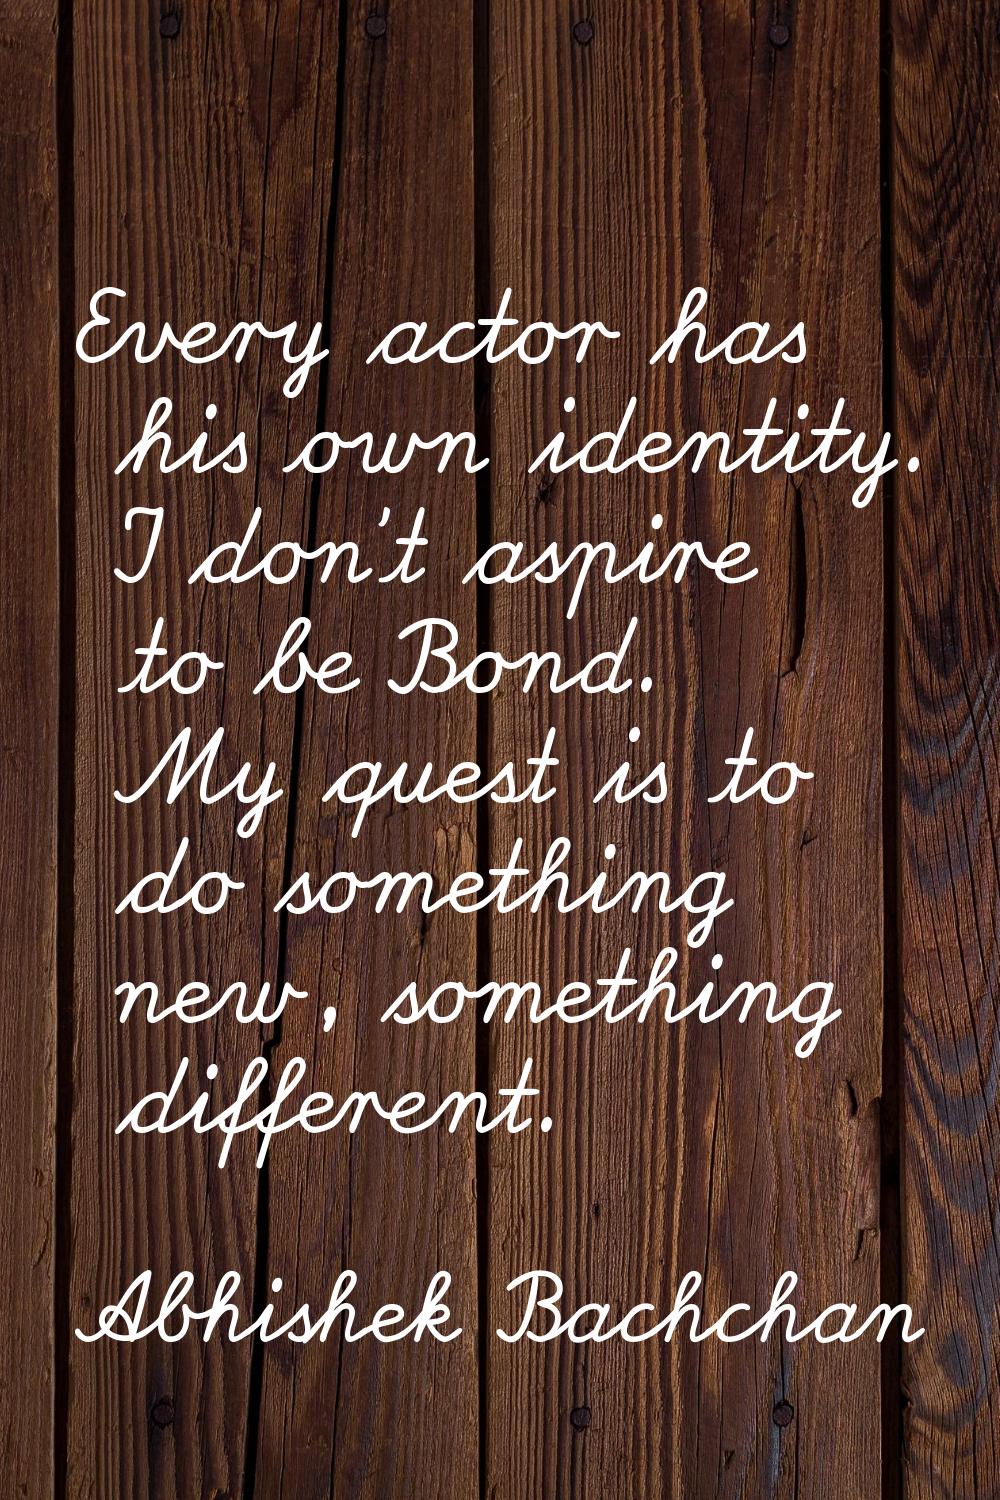 Every actor has his own identity. I don't aspire to be Bond. My quest is to do something new, somet